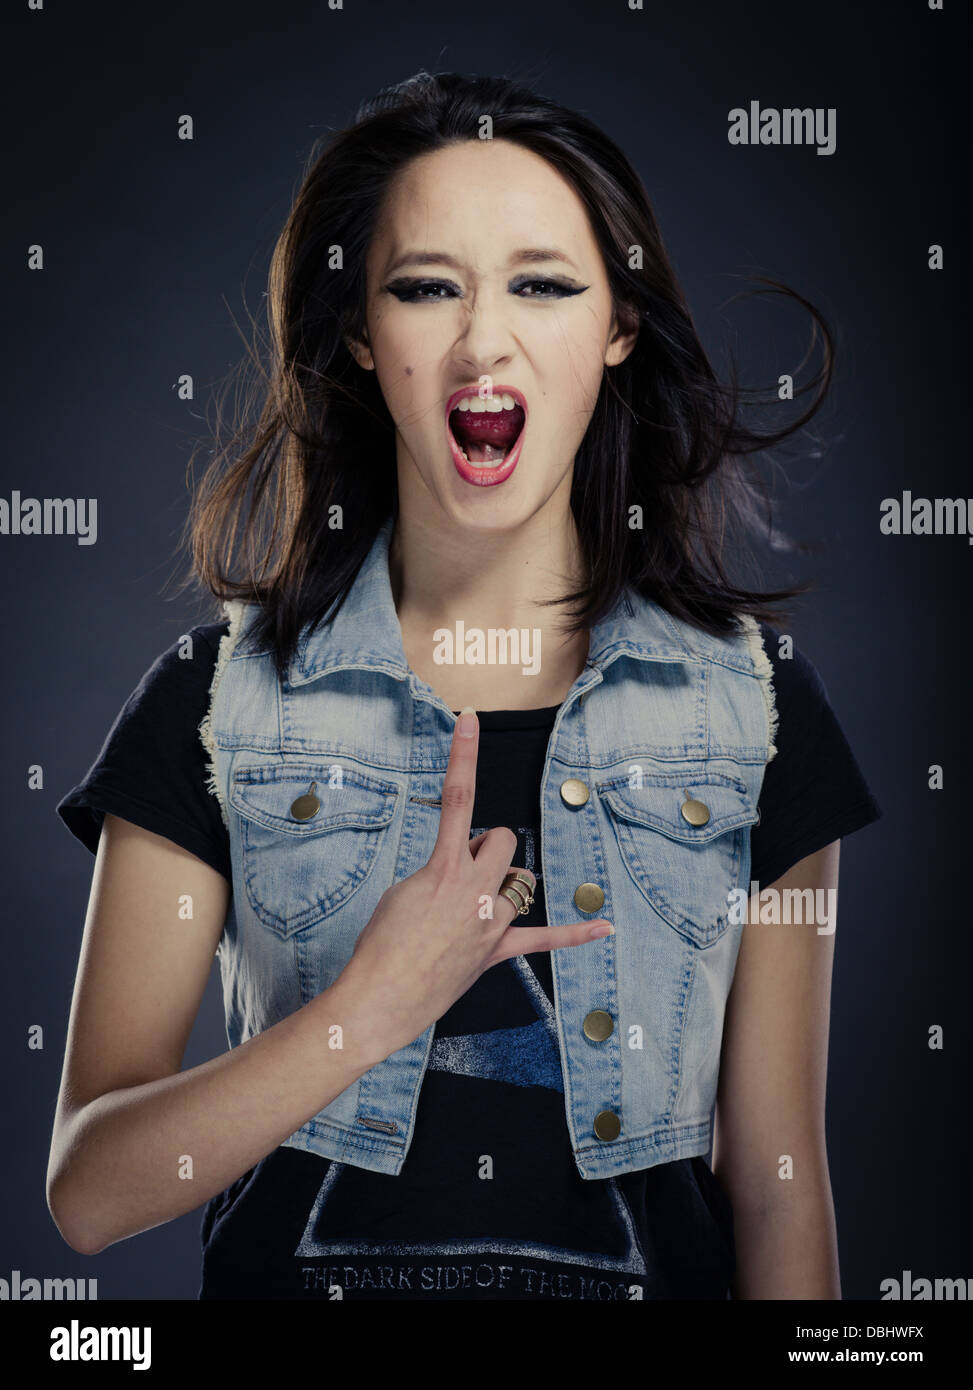 Beautiful Asian woman with long dark hair heavy metal rocker making sign of the horns hand gesture Stock Photo